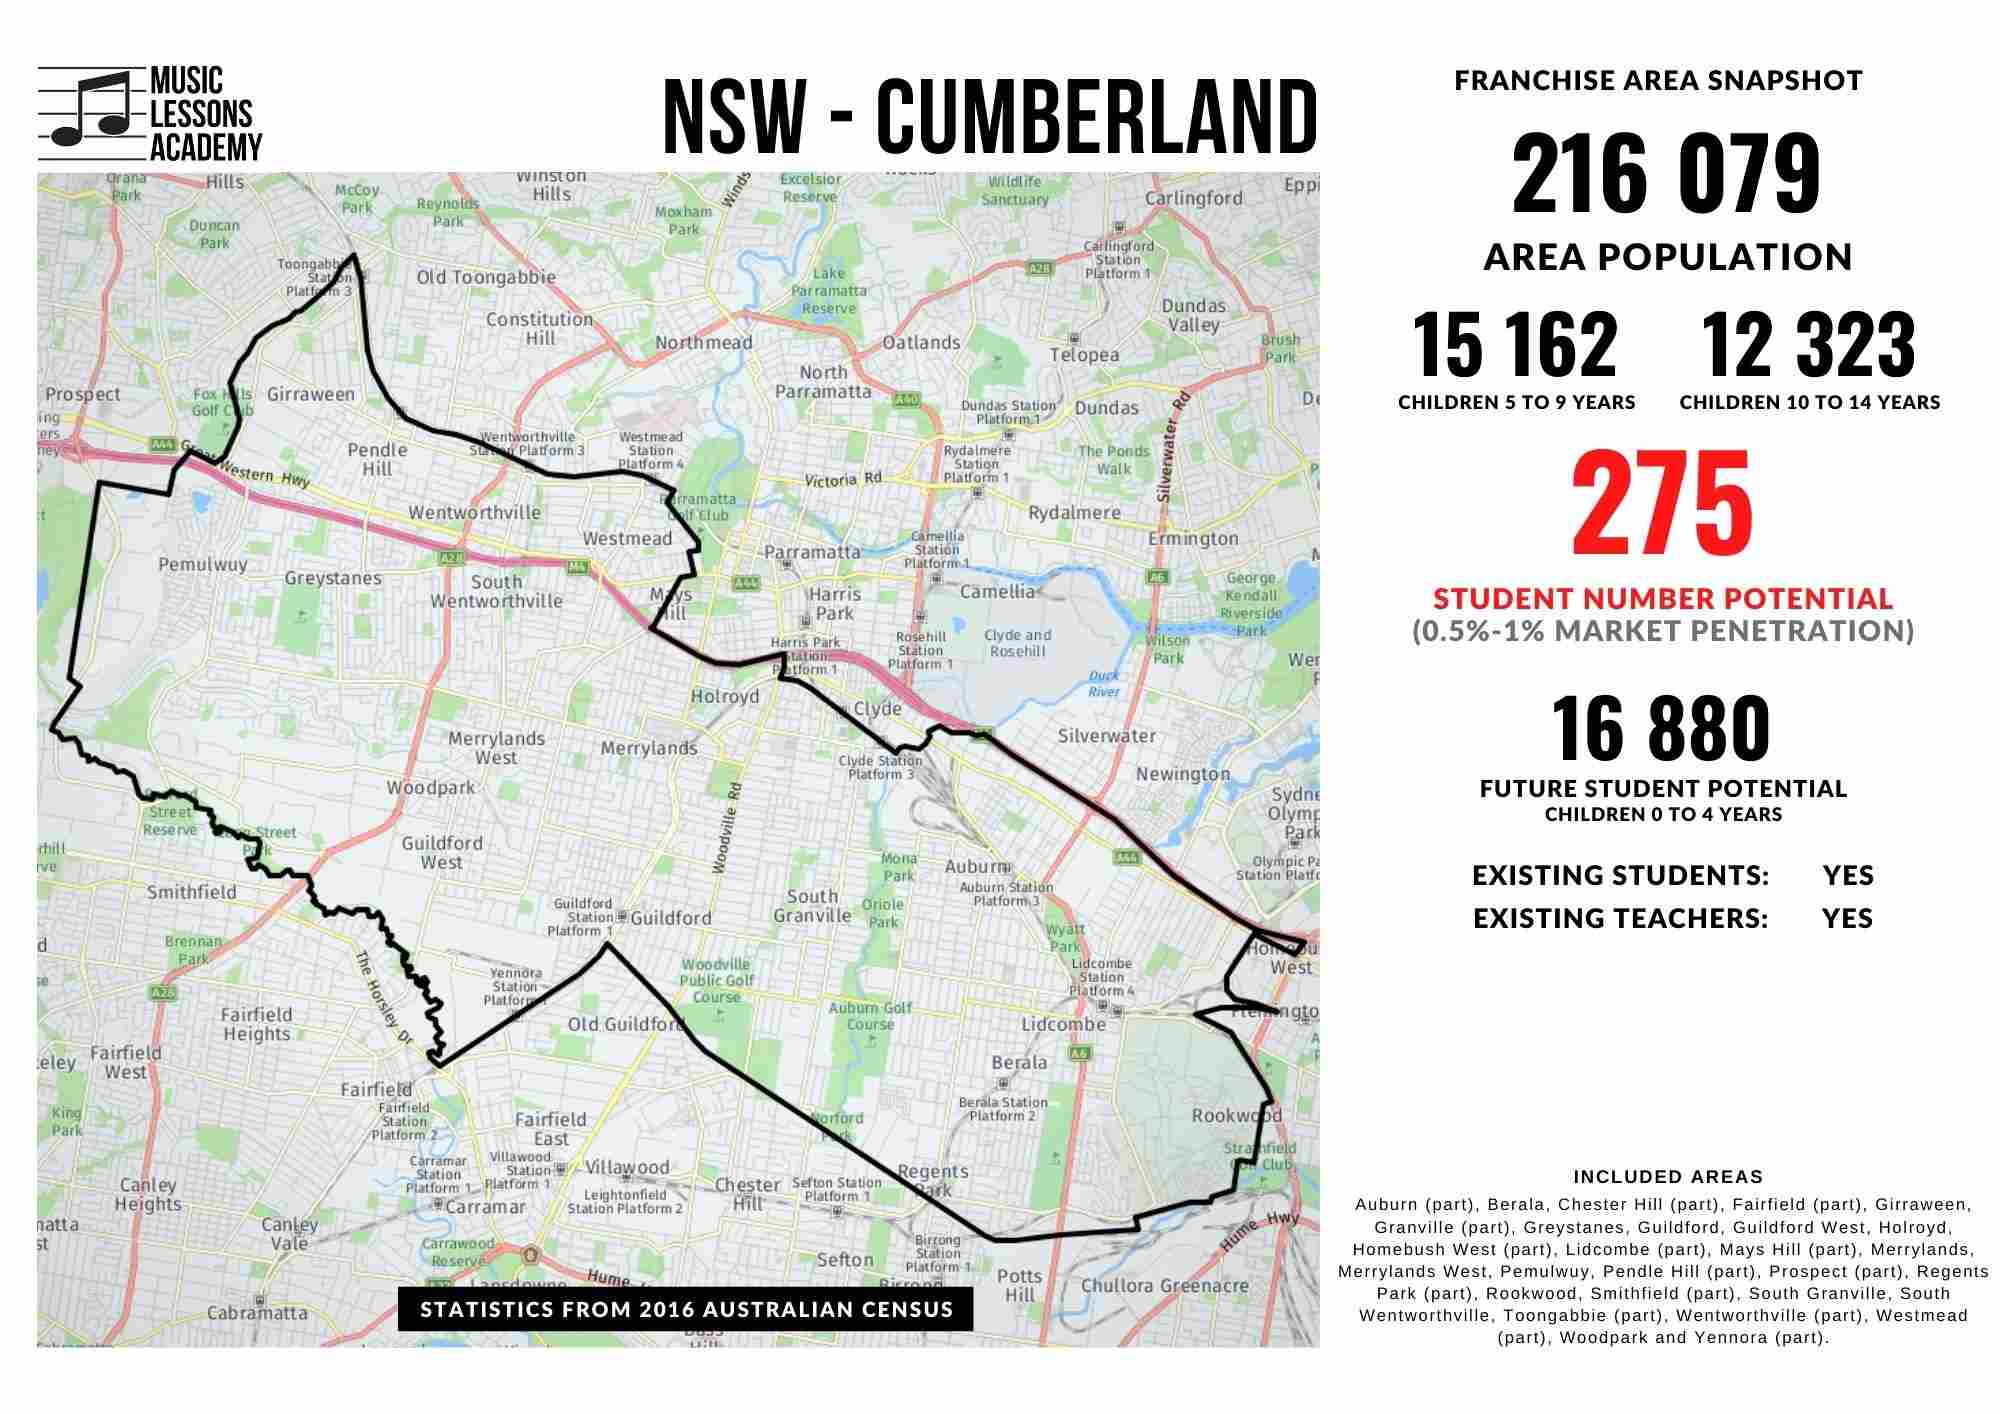 NSW Cumberland Franchise for sale